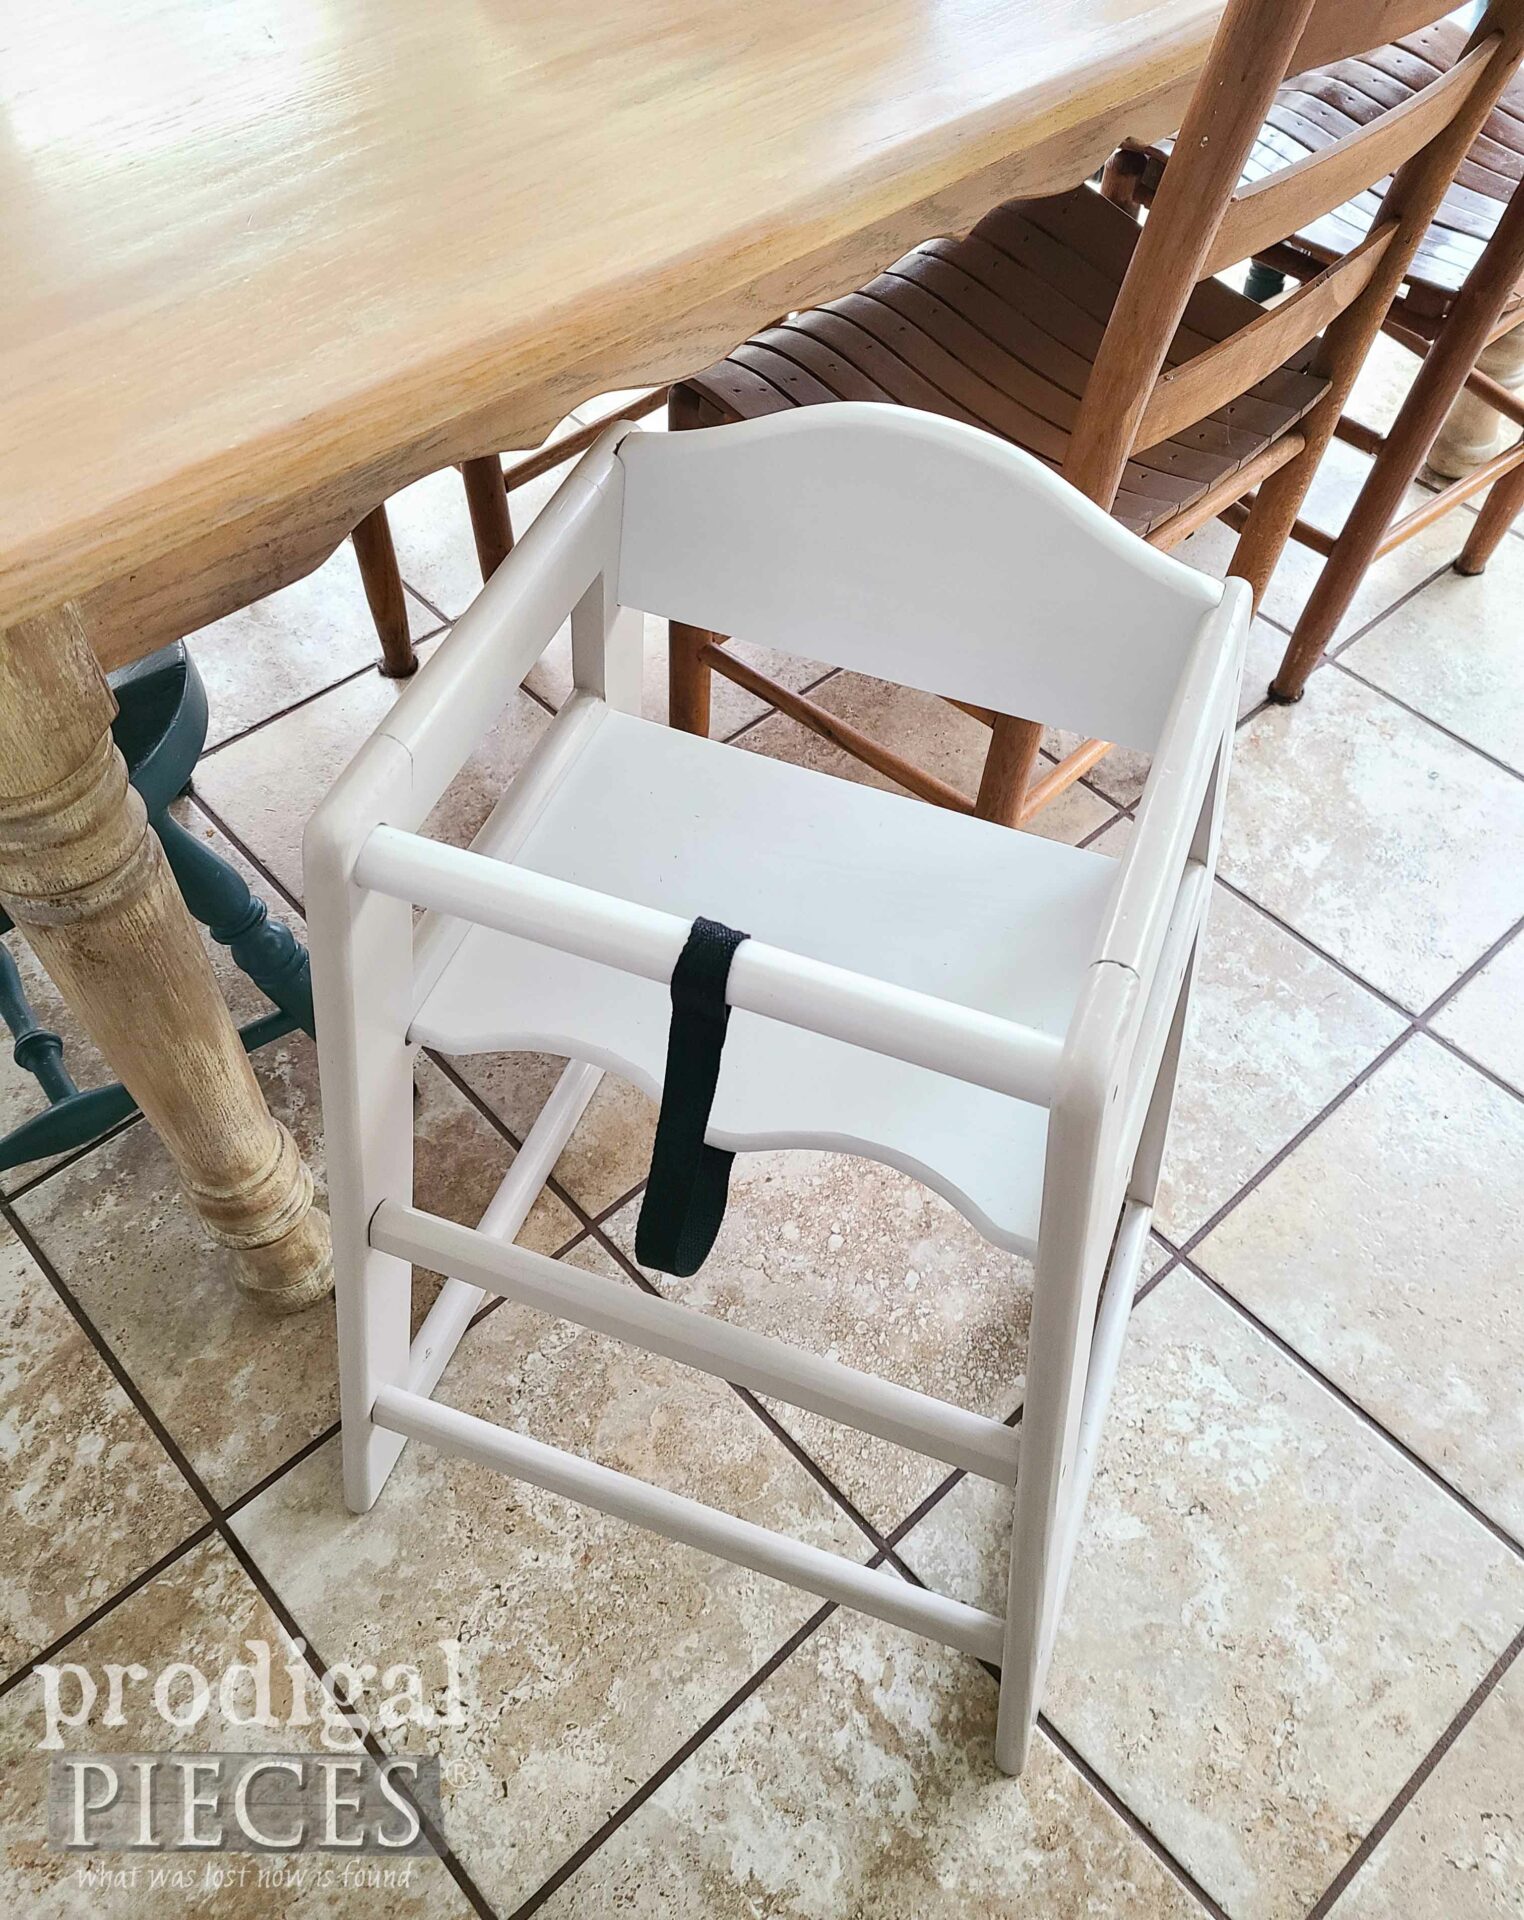 Top View of Modern DIY Painted Highchair by Larissa of Prodigal Pieces | prodigalpieces.com #prodigalpieces #farmhouse #diy #furniture